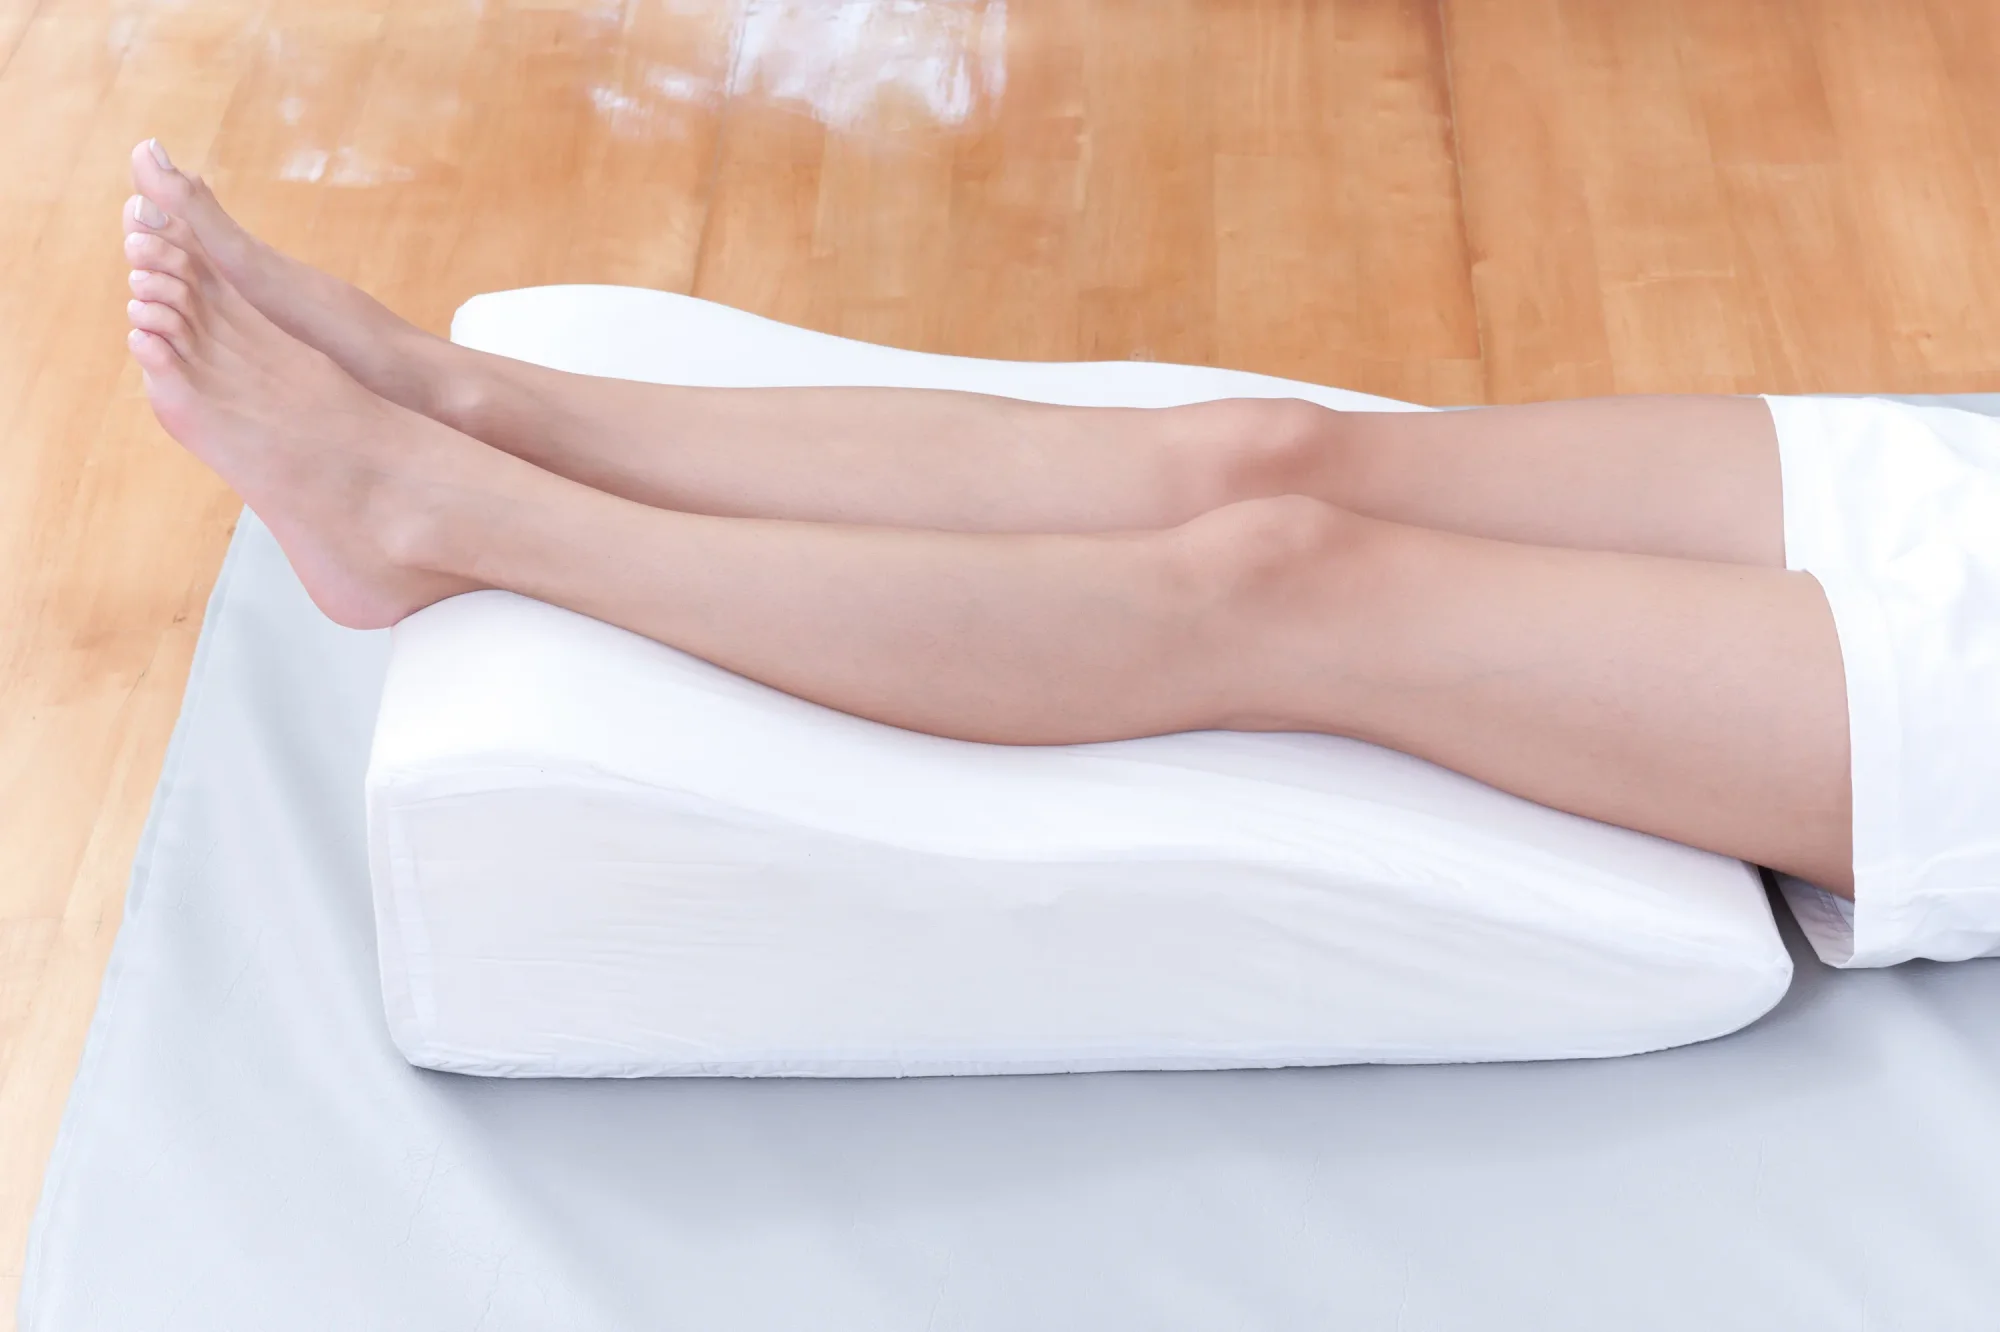 A woman's legs elevated on a pillow to increase circulation and alleviate edema swelling.